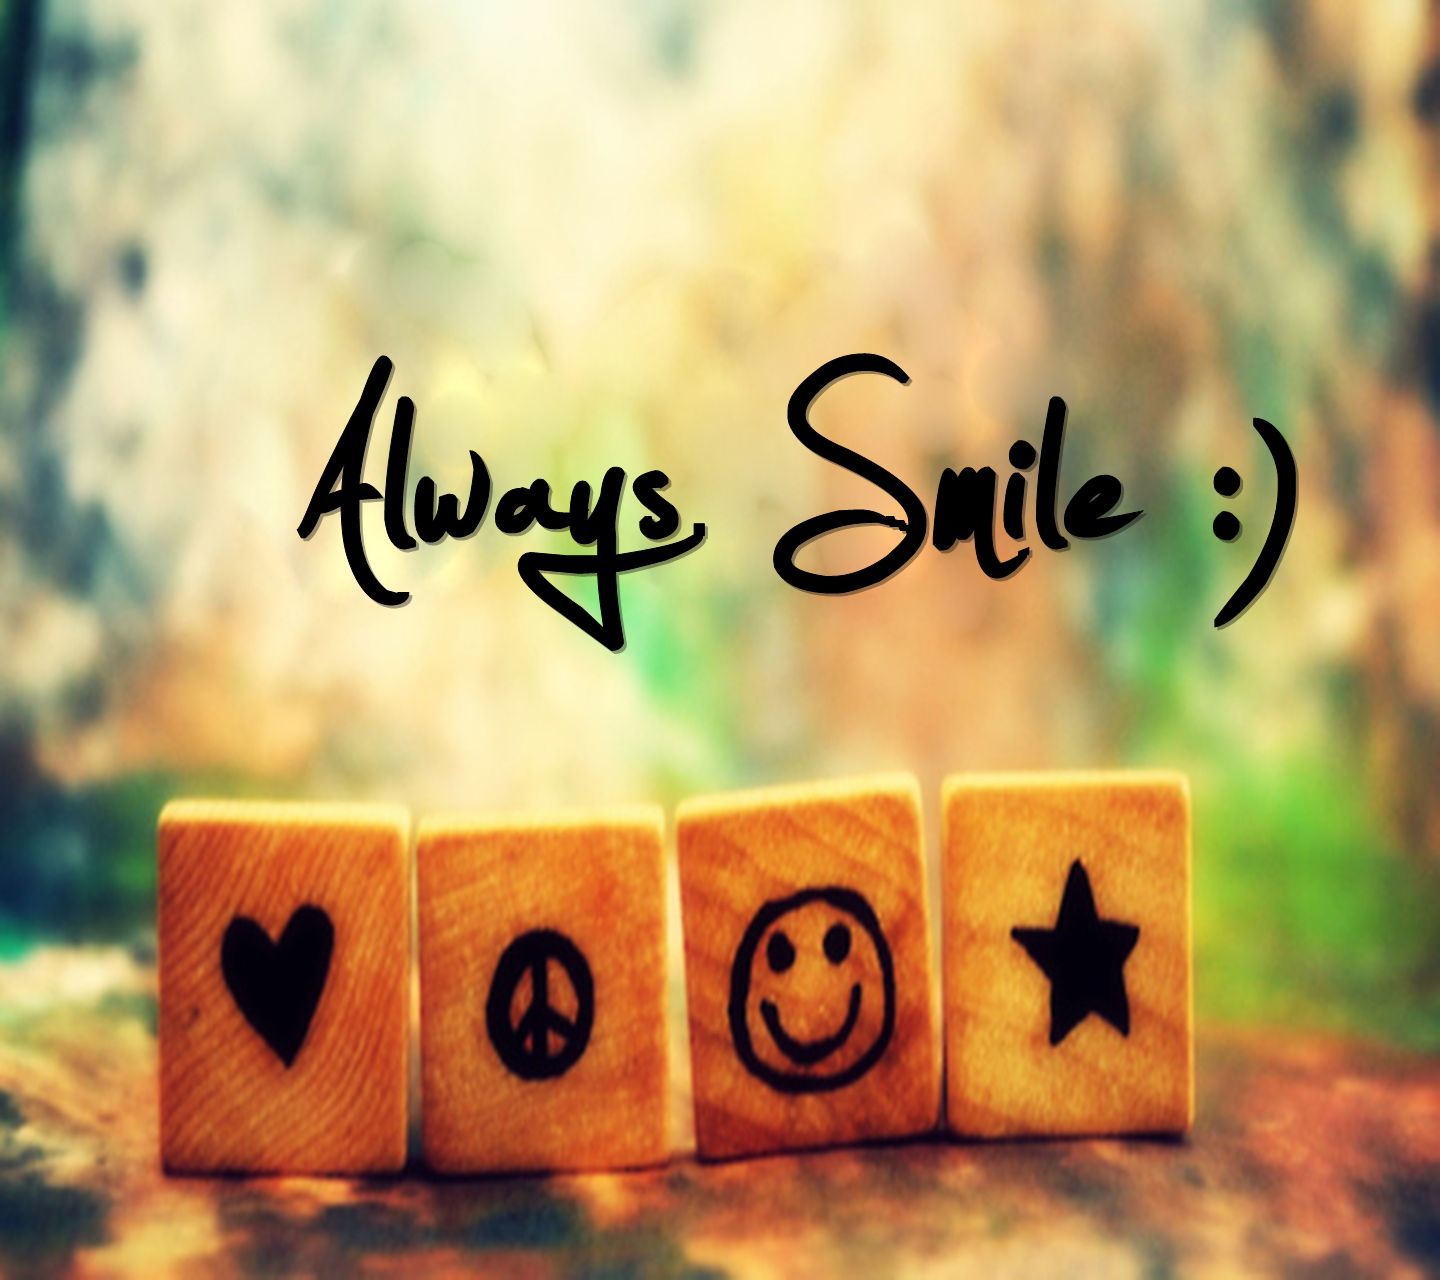 Just Smile Wallpaper Free Just Smile Background